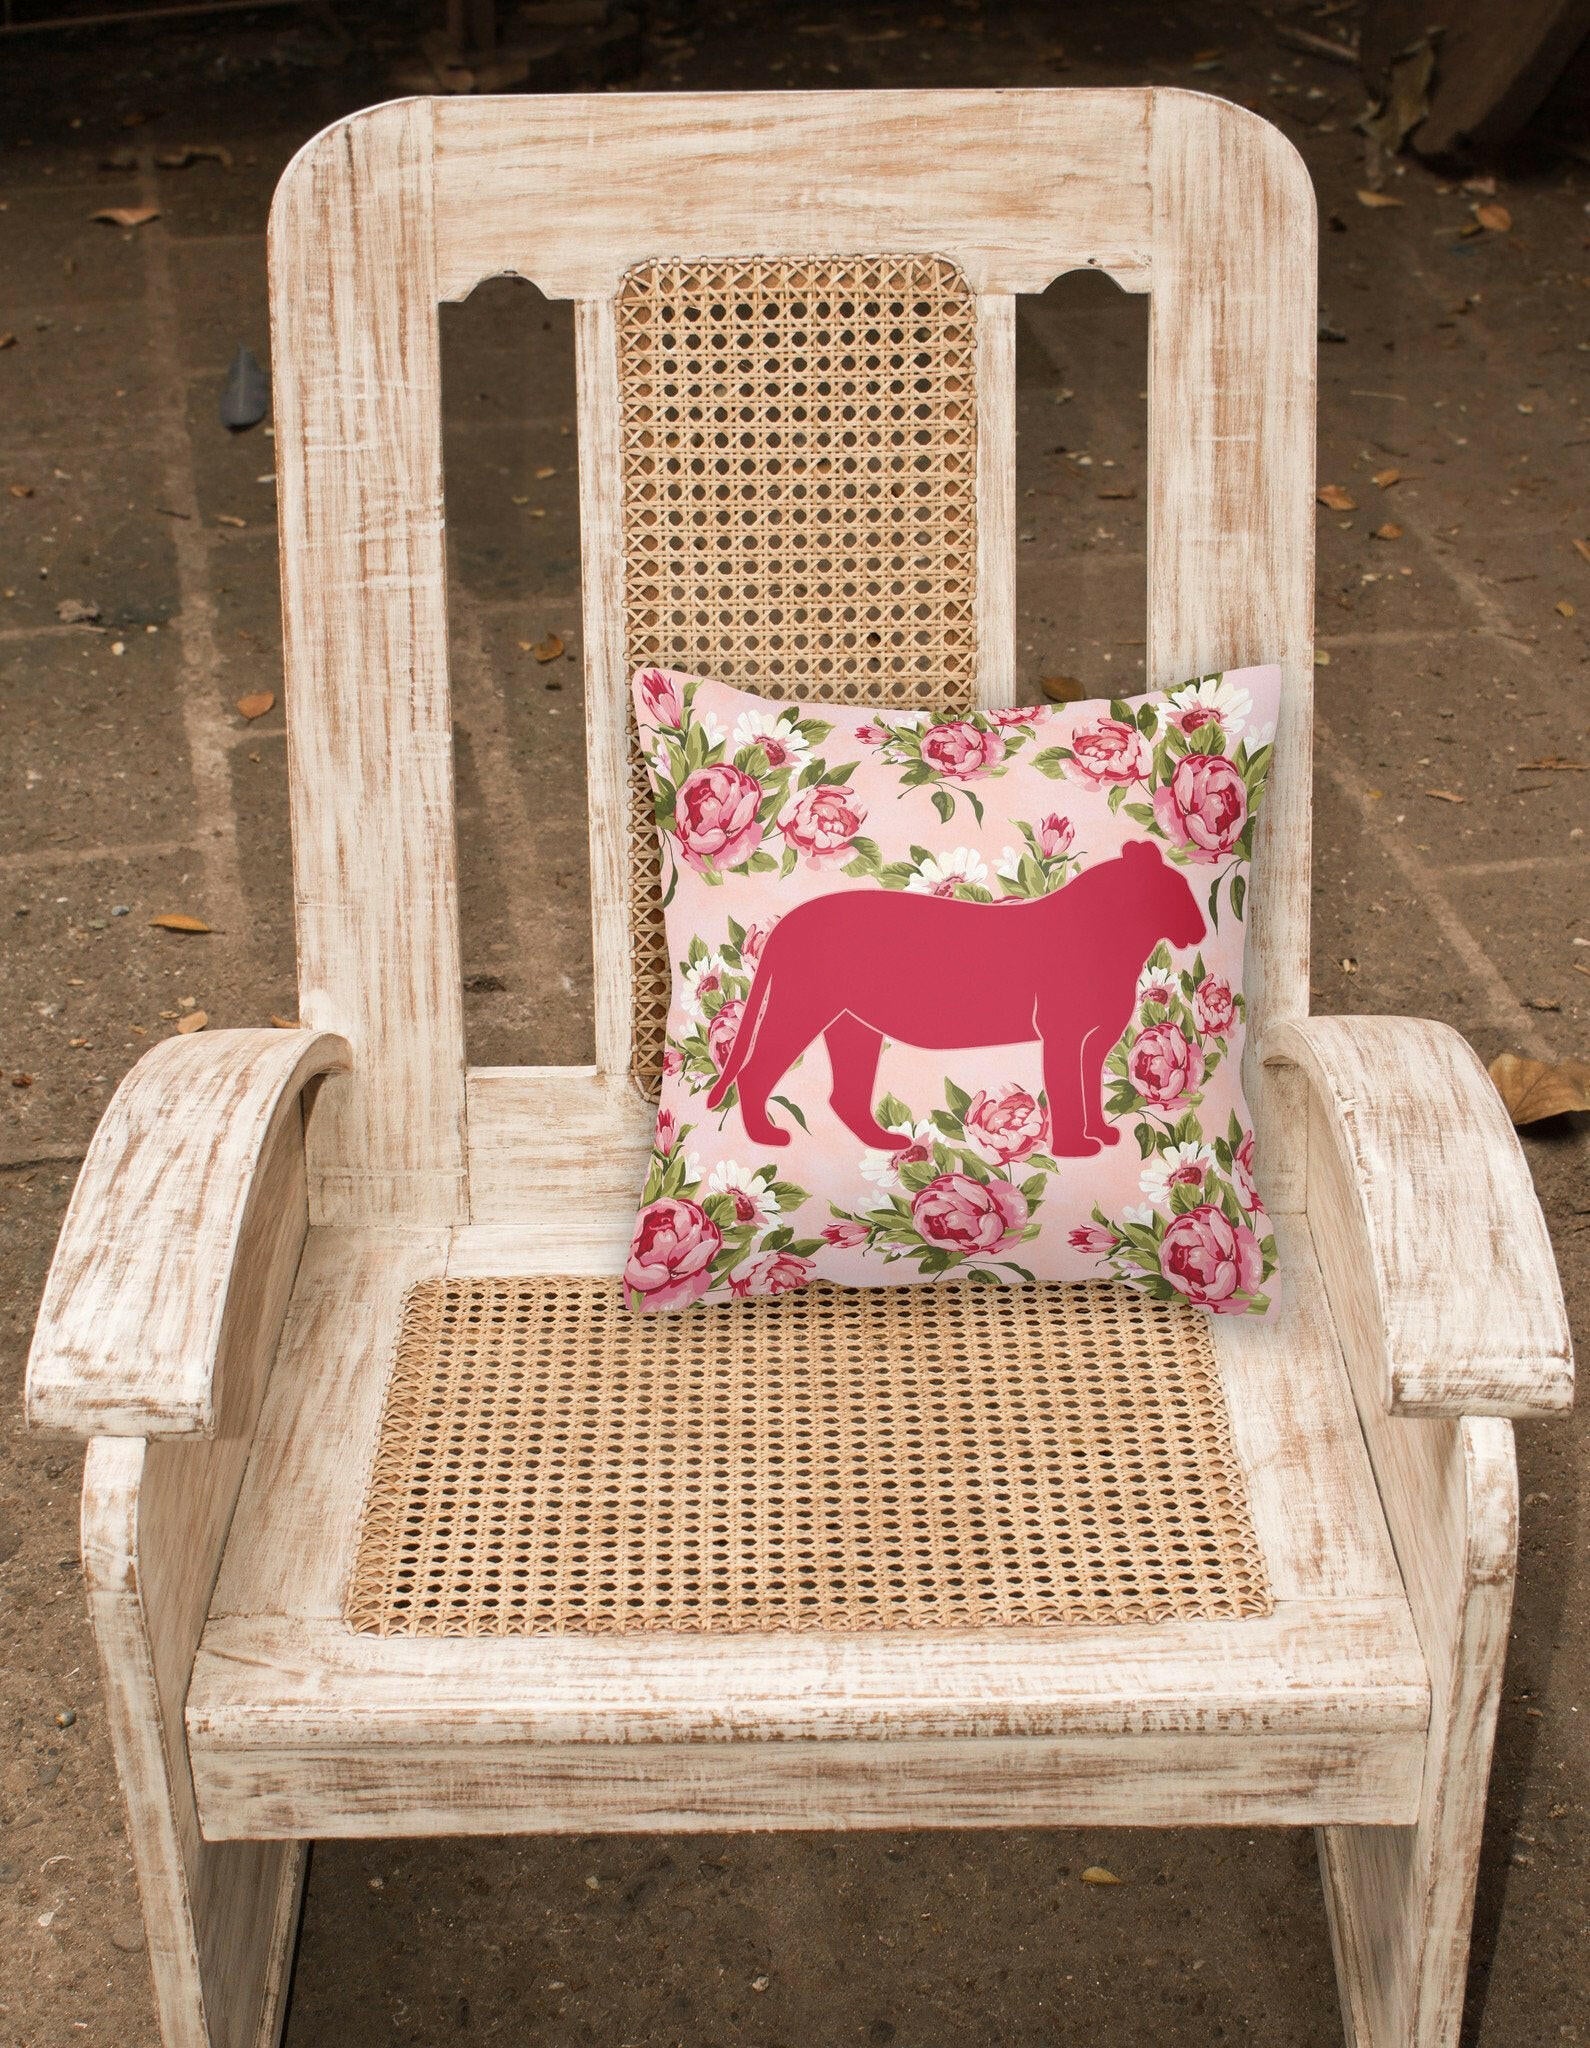 Tiger Shabby Chic Pink Roses   Fabric Decorative Pillow BB1010-RS-PK-PW1414 - the-store.com